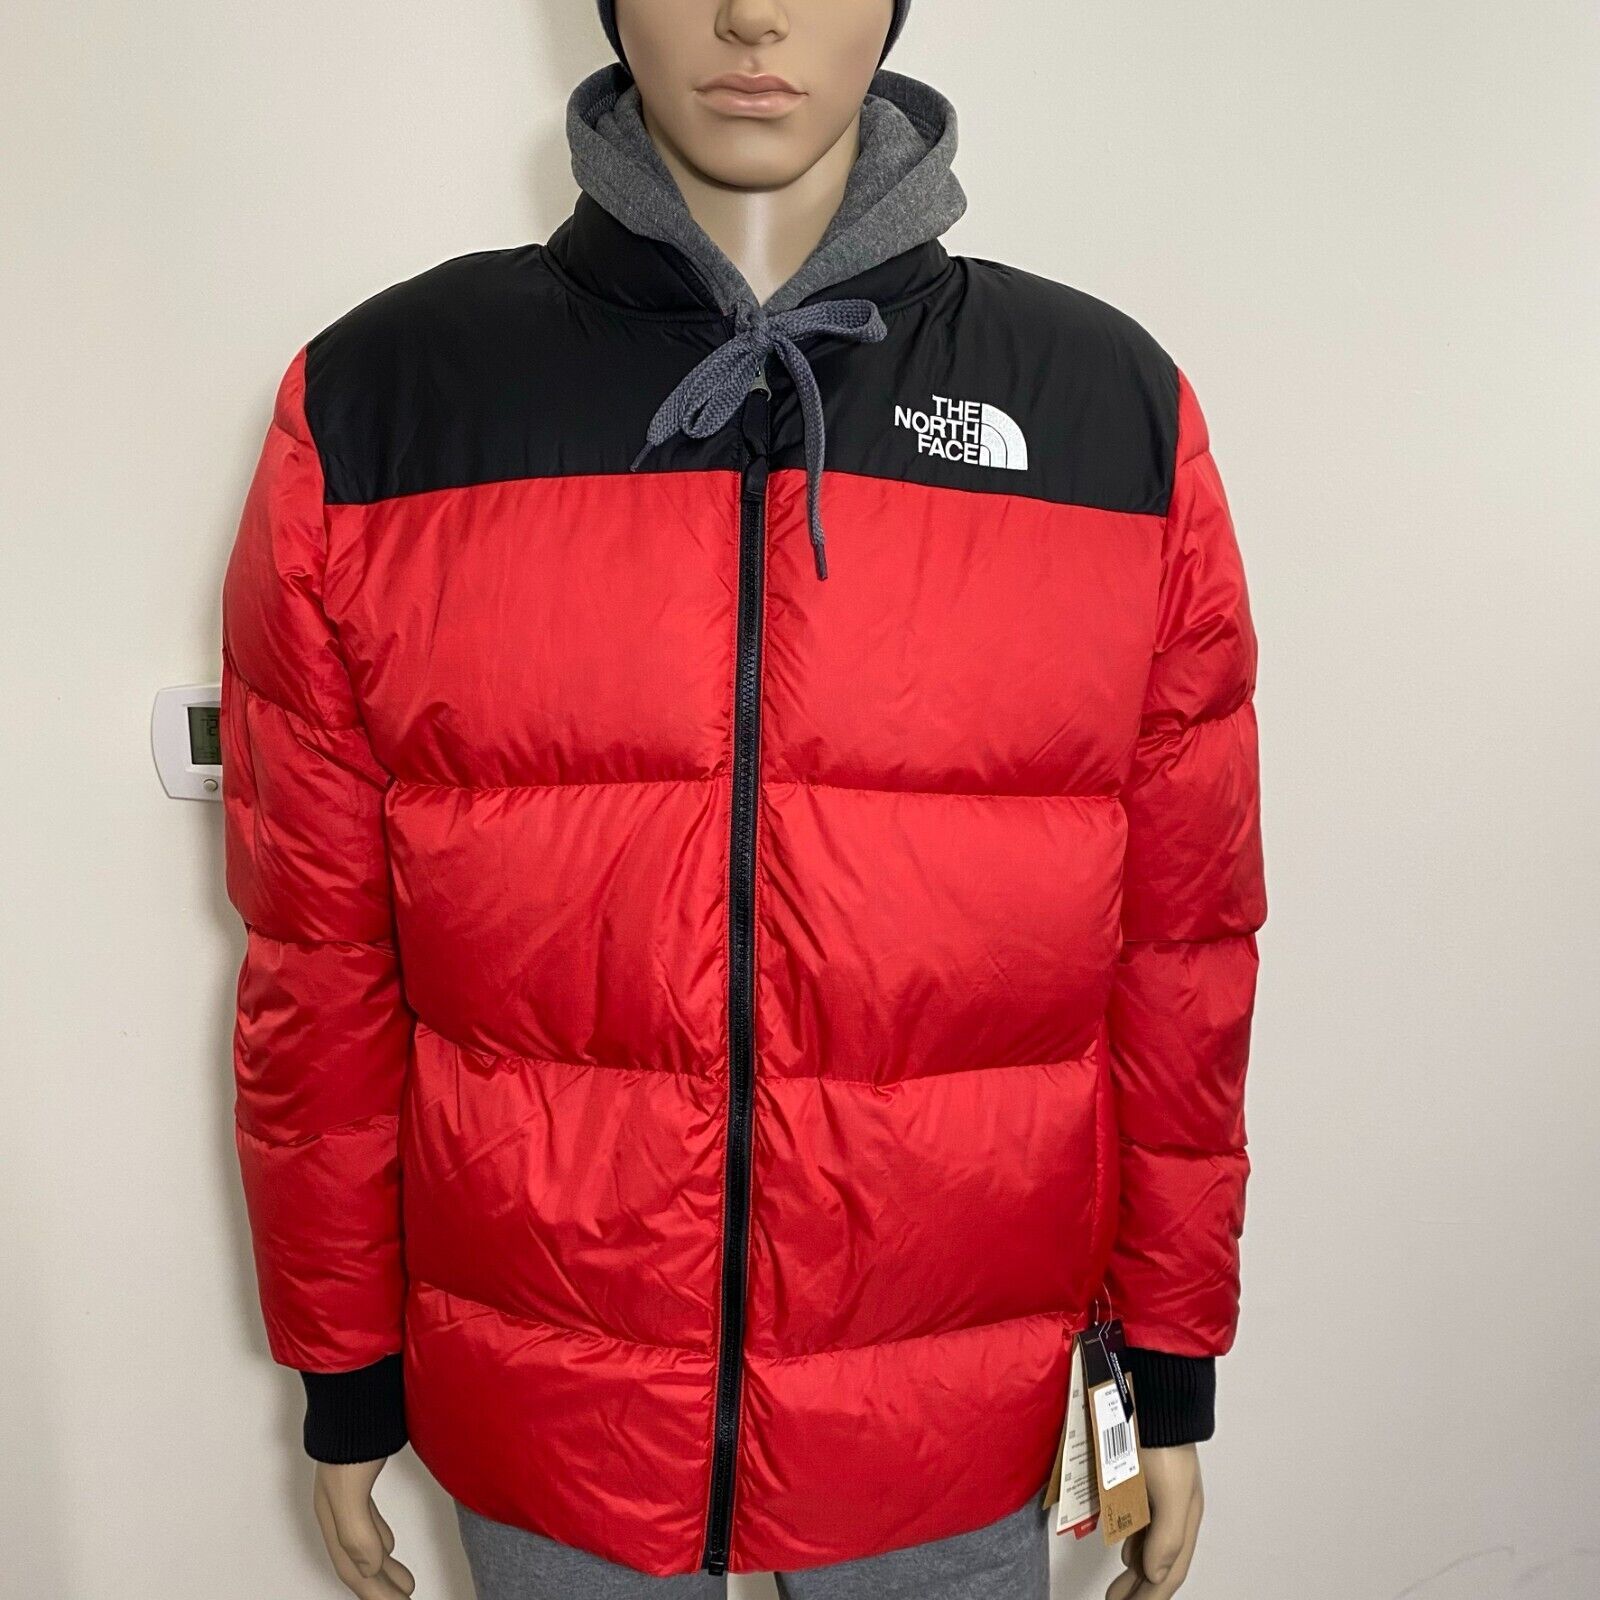 Primary image for The North Face Men's Nordic Jacket 700 Down Bomber Puffer Coat TNF Red S M L NEW